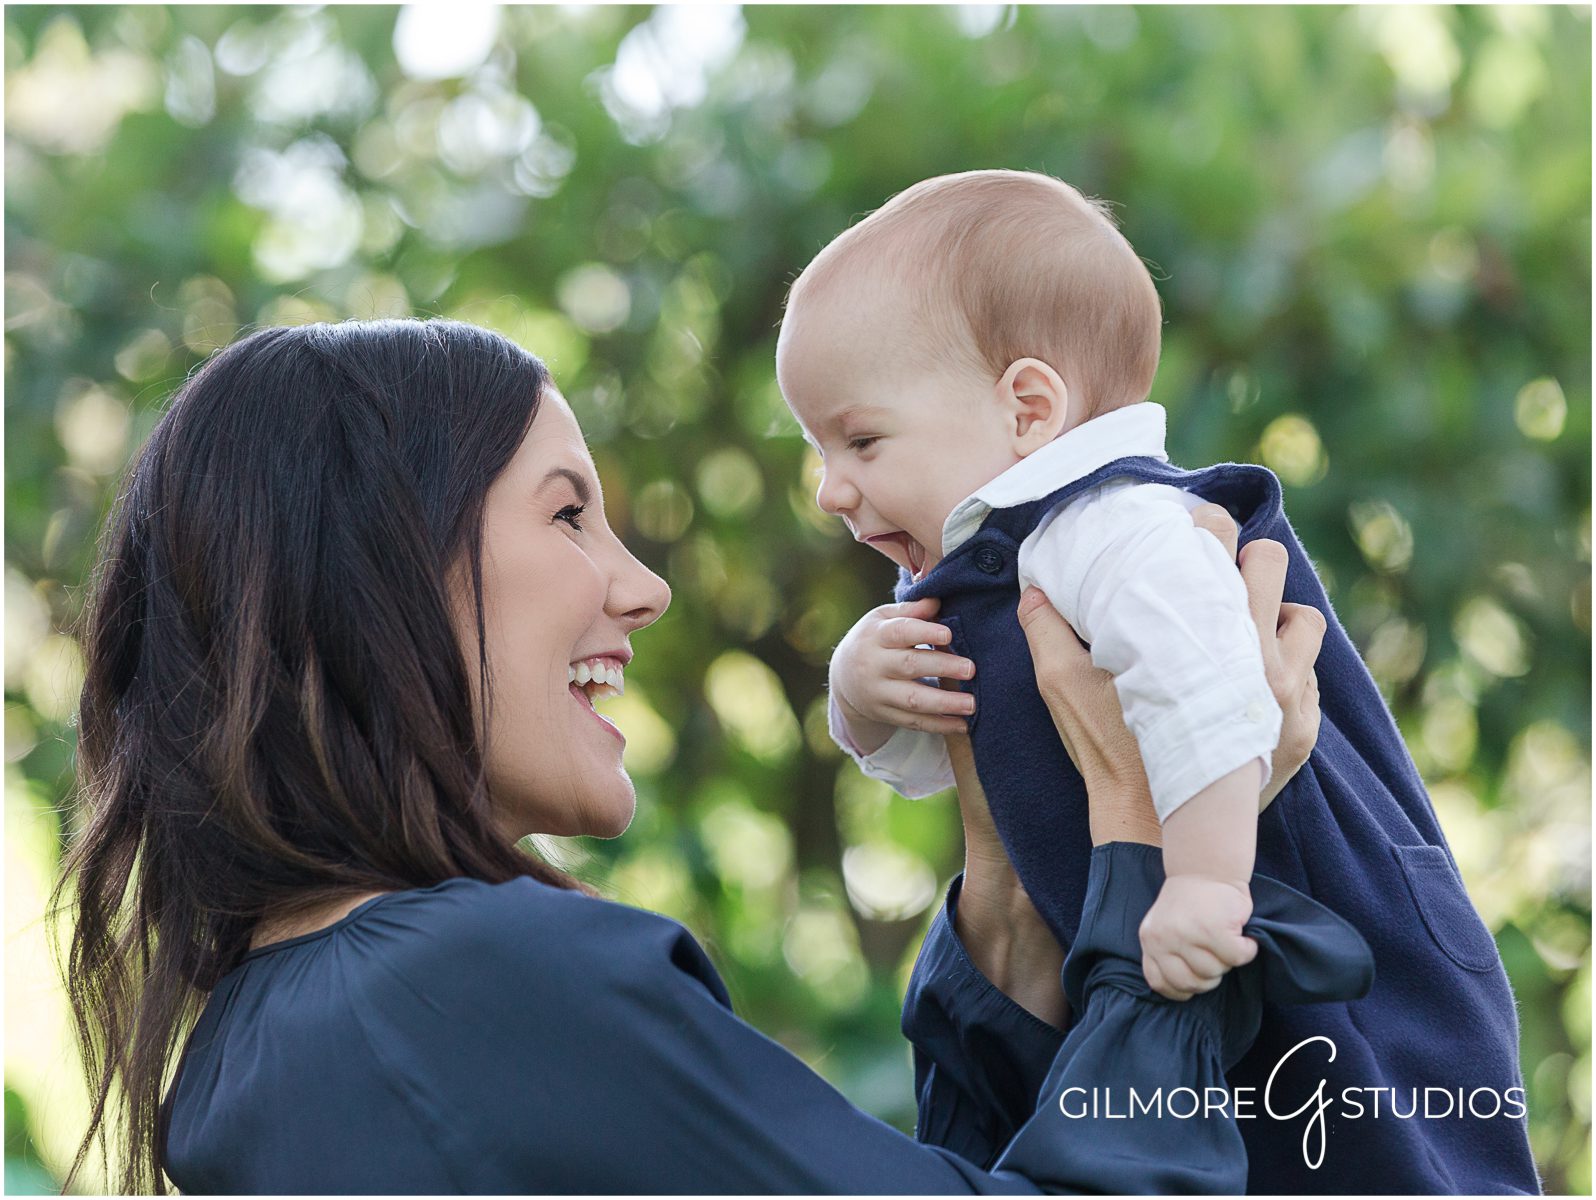 mommy, me, baby, boy, outdoors, garden, park, playing, Orange County Family Photography